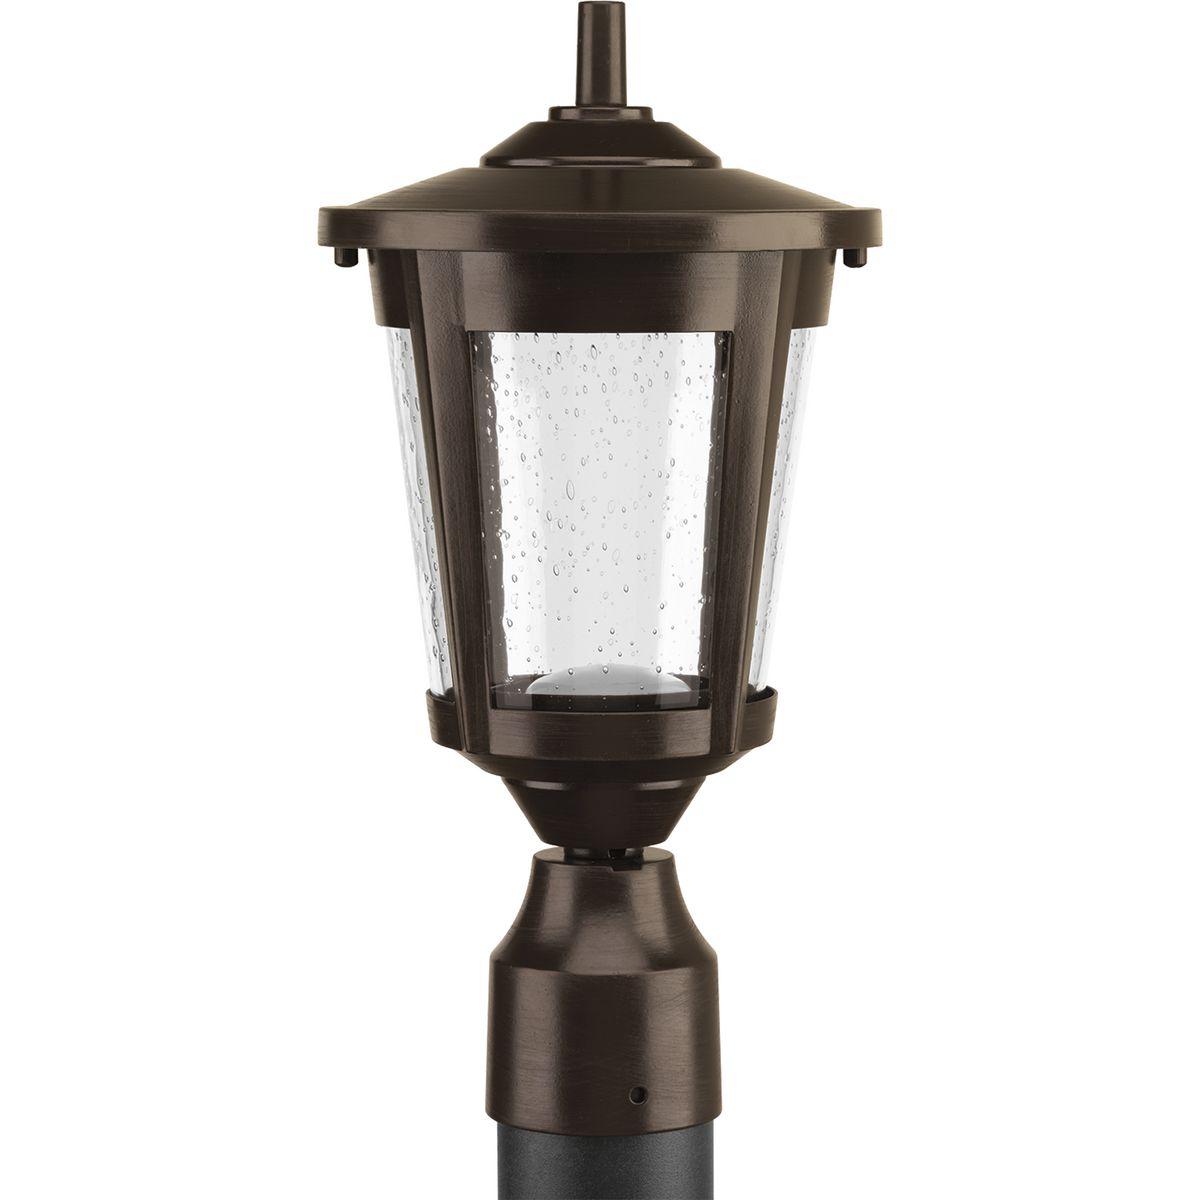 Hubbell P6430-2030K9 The East Haven LED Collection offers modern styling to complement a wide variety of home styles. The one-light LED post lantern has an Antique Bronze frame that cradles a seeded glass shade. Fits 3" post (order separately). 120V AC replaceable LED module,